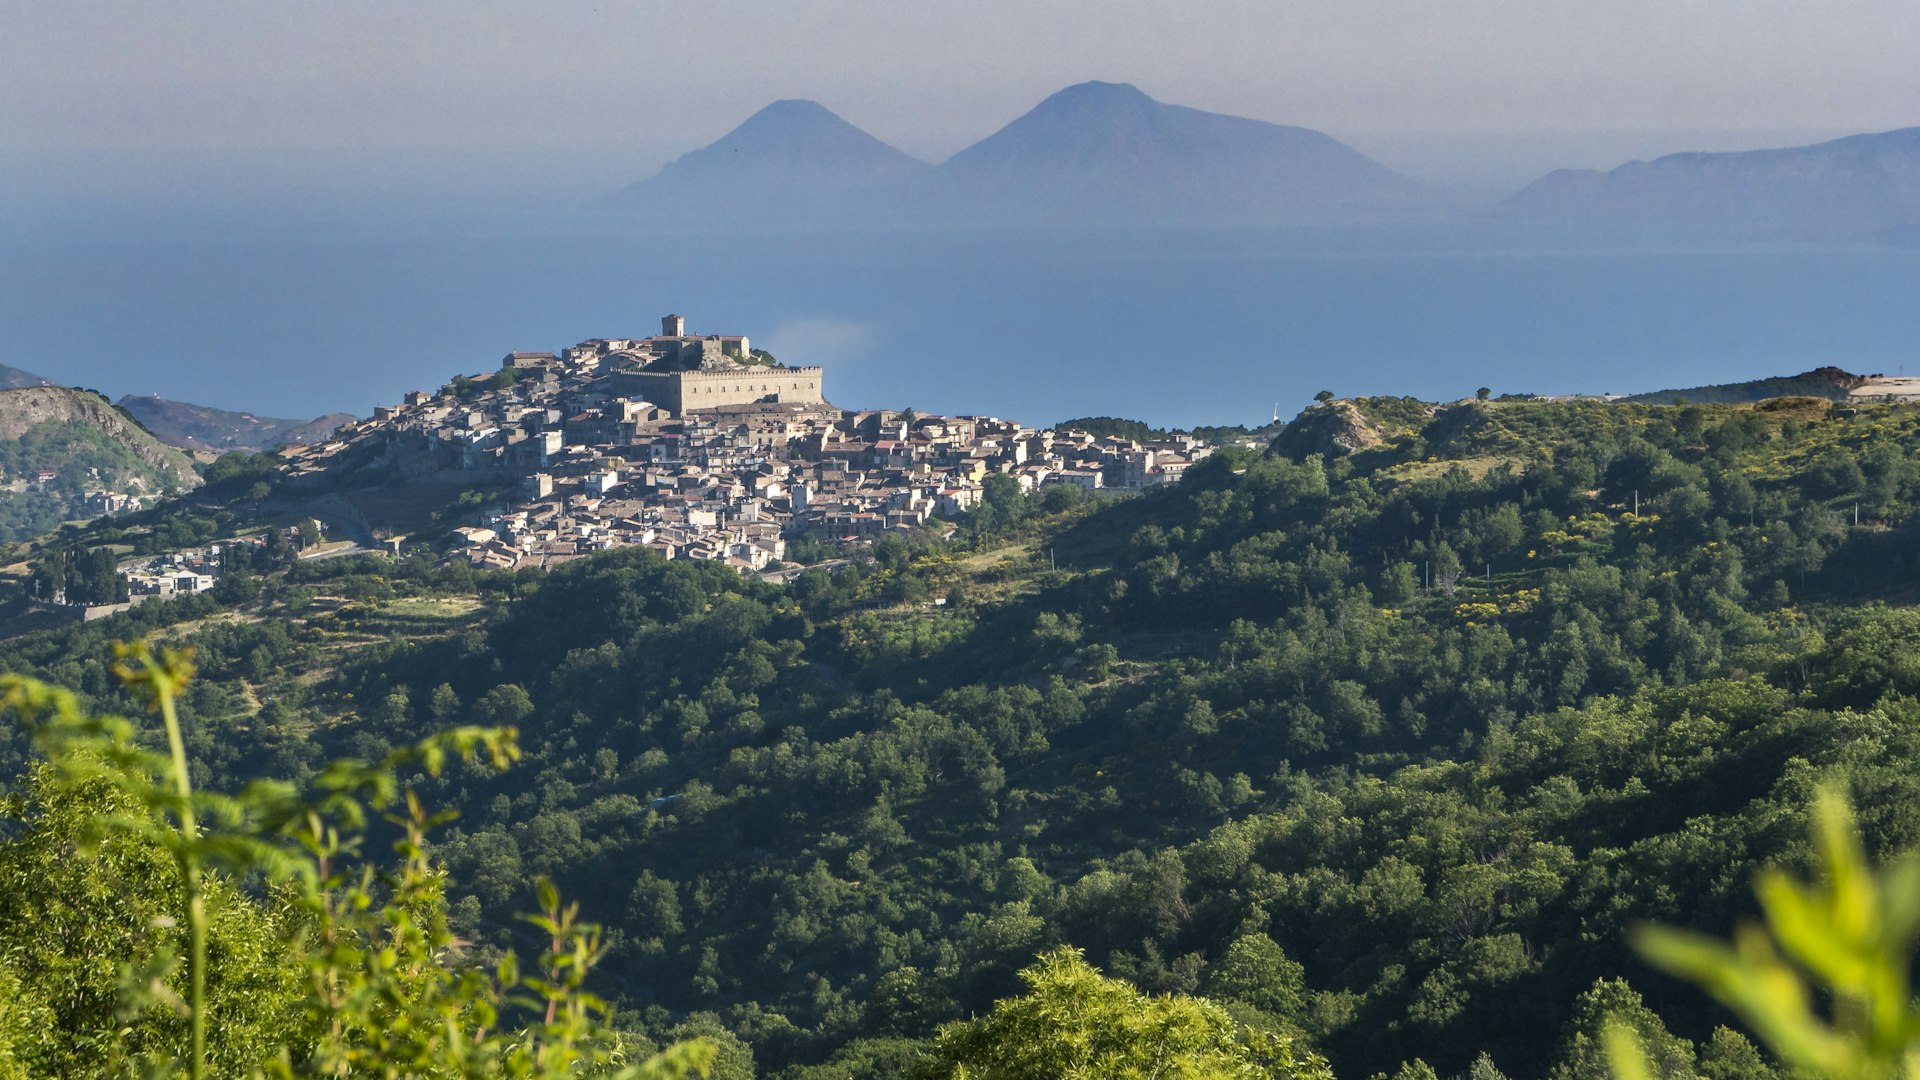 A medieval town on a hill surrounded by woodland with distant mountain peaks